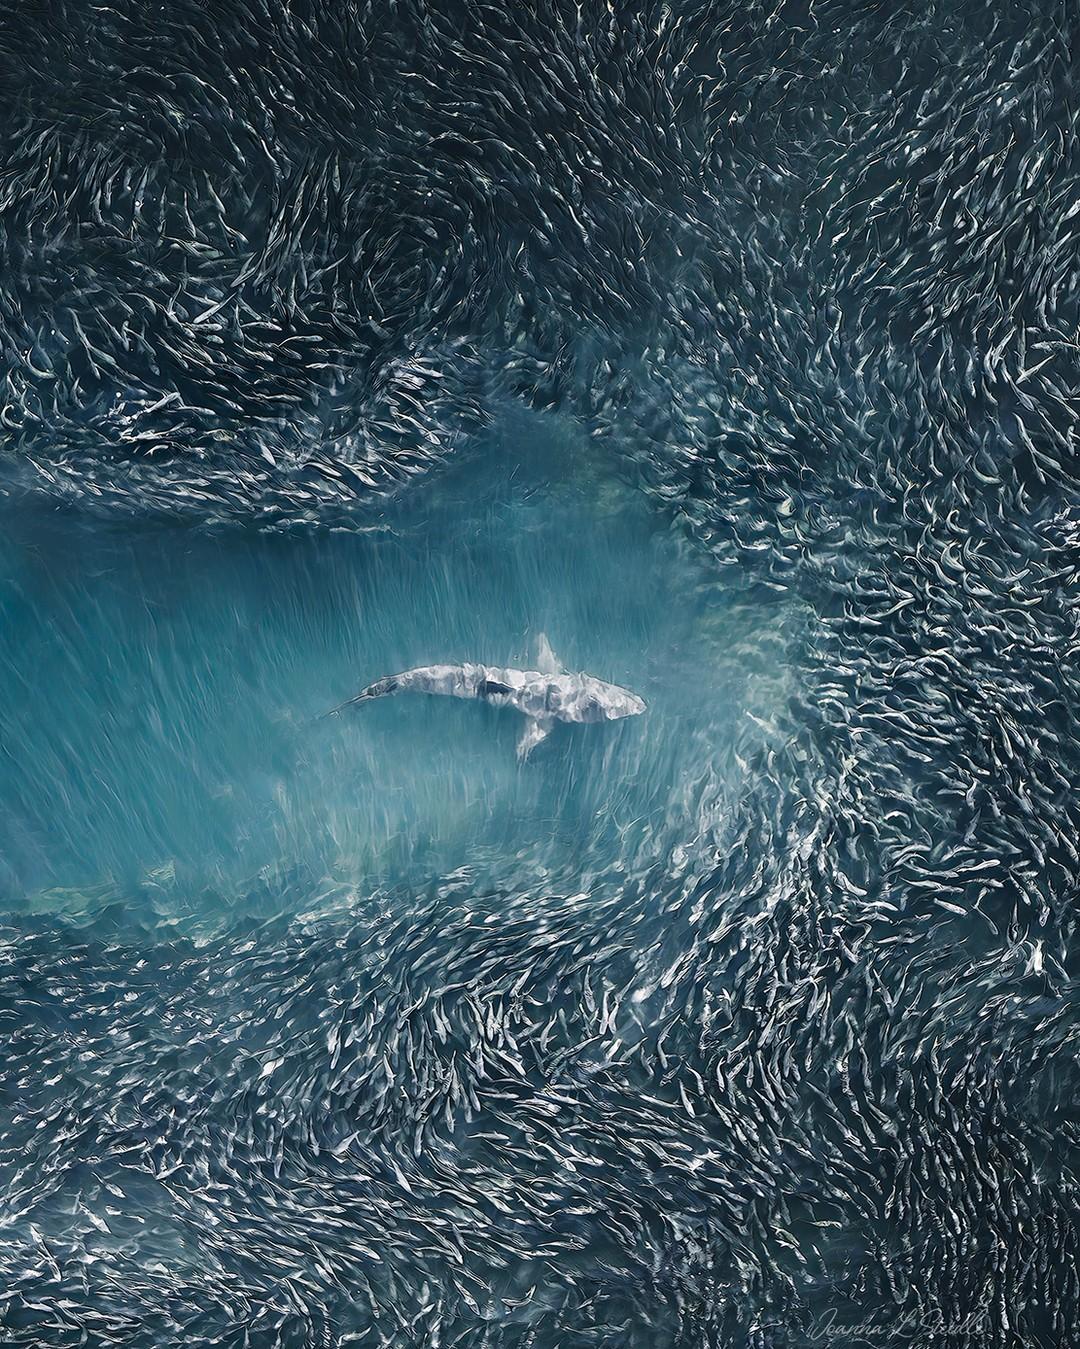 A shark is viewed from above as it plows through a school of thousands of bunker fish, or bait ball, off the coast of Long Island, New York. (Courtesy of <a href="https://www.instagram.com/hamptonsdroneart/">Joanna L Steidle</a>)